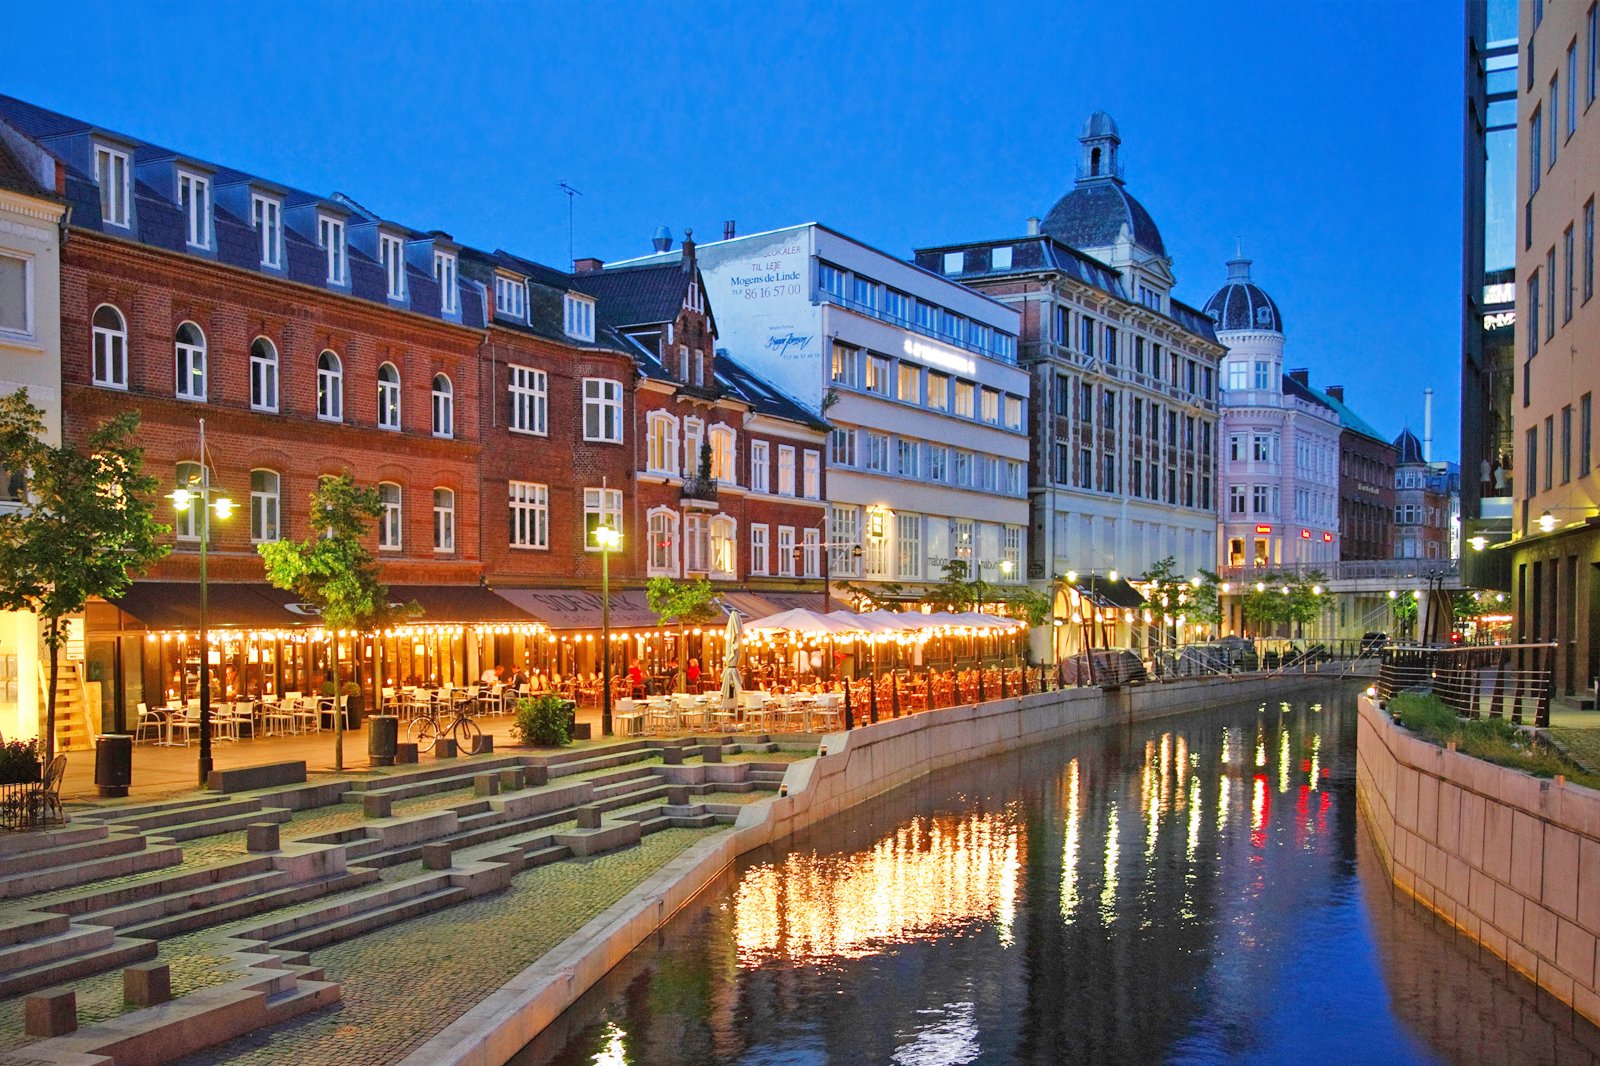 9 Best Things To Do In Aarhus For Couples Aarhus Most Romantic Places Go Guides 0276